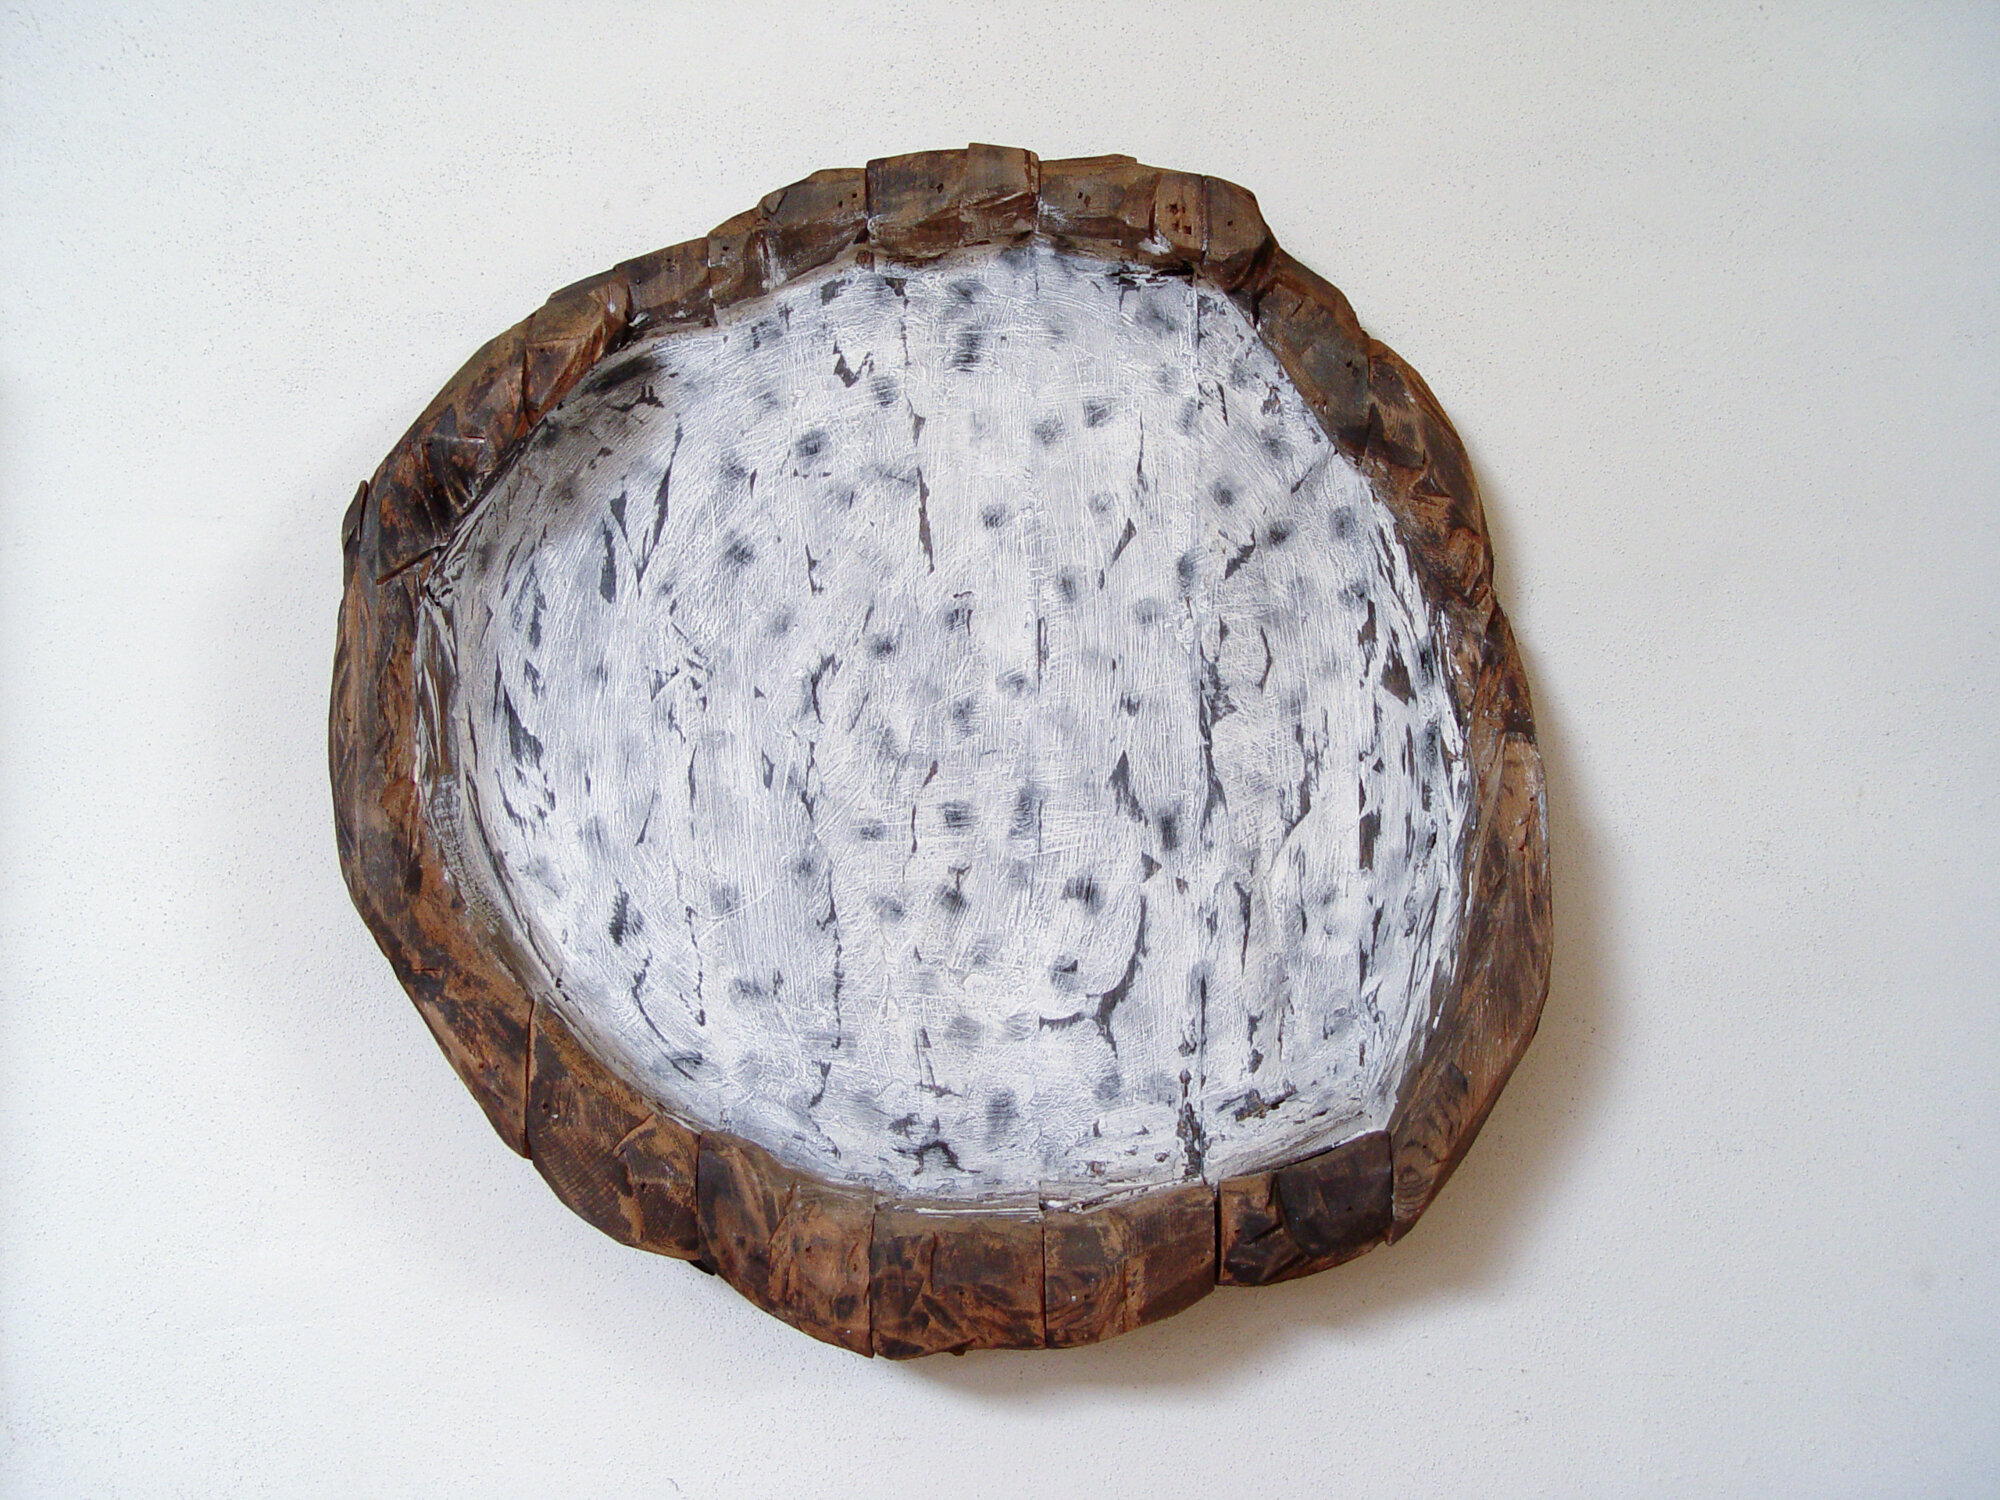       Trzy (Three) , 2008 Cedar, plaster, and ink 26 x 26 x 5 in.    Galerie Lelong &amp; Co.  